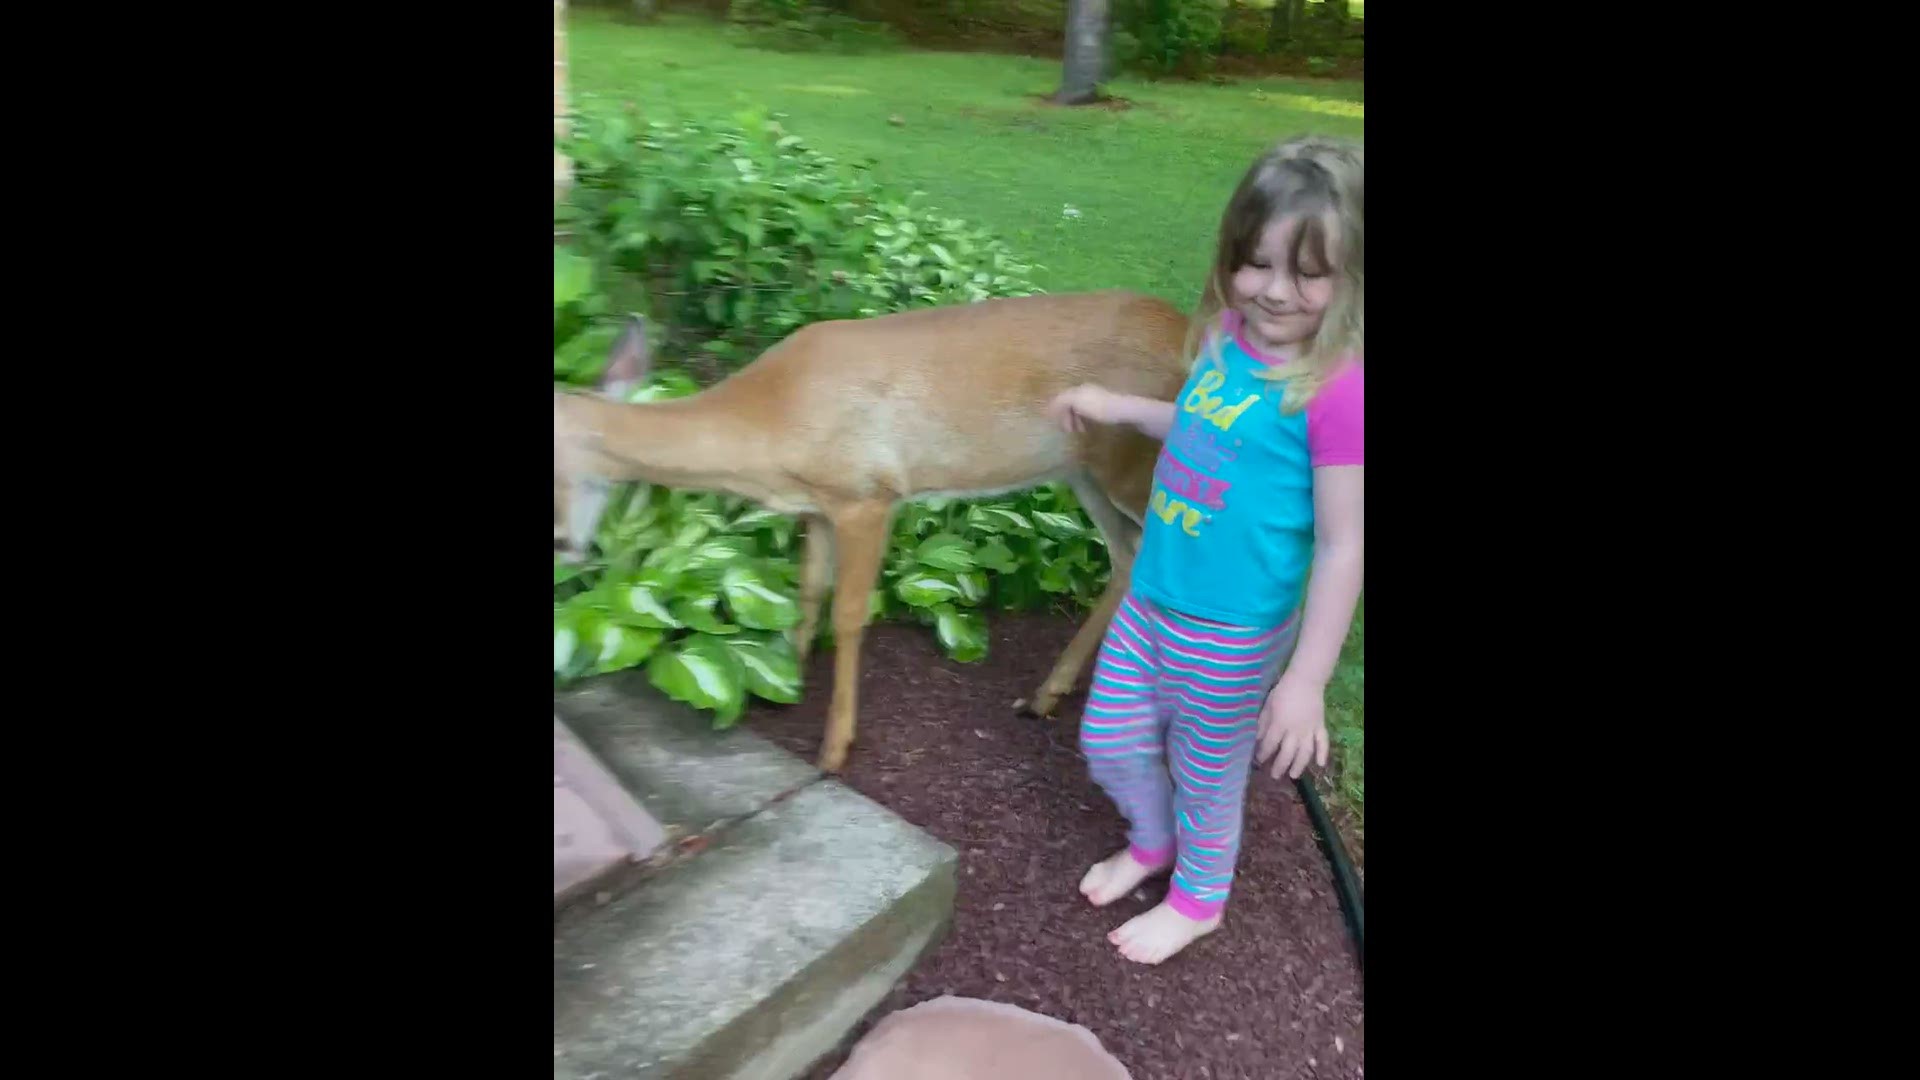 Video of my daughter and son petting and getting kicked by friendly deer that visited us the morning of May 27 in Sheppton, PA.
Credit: Amy Loftus